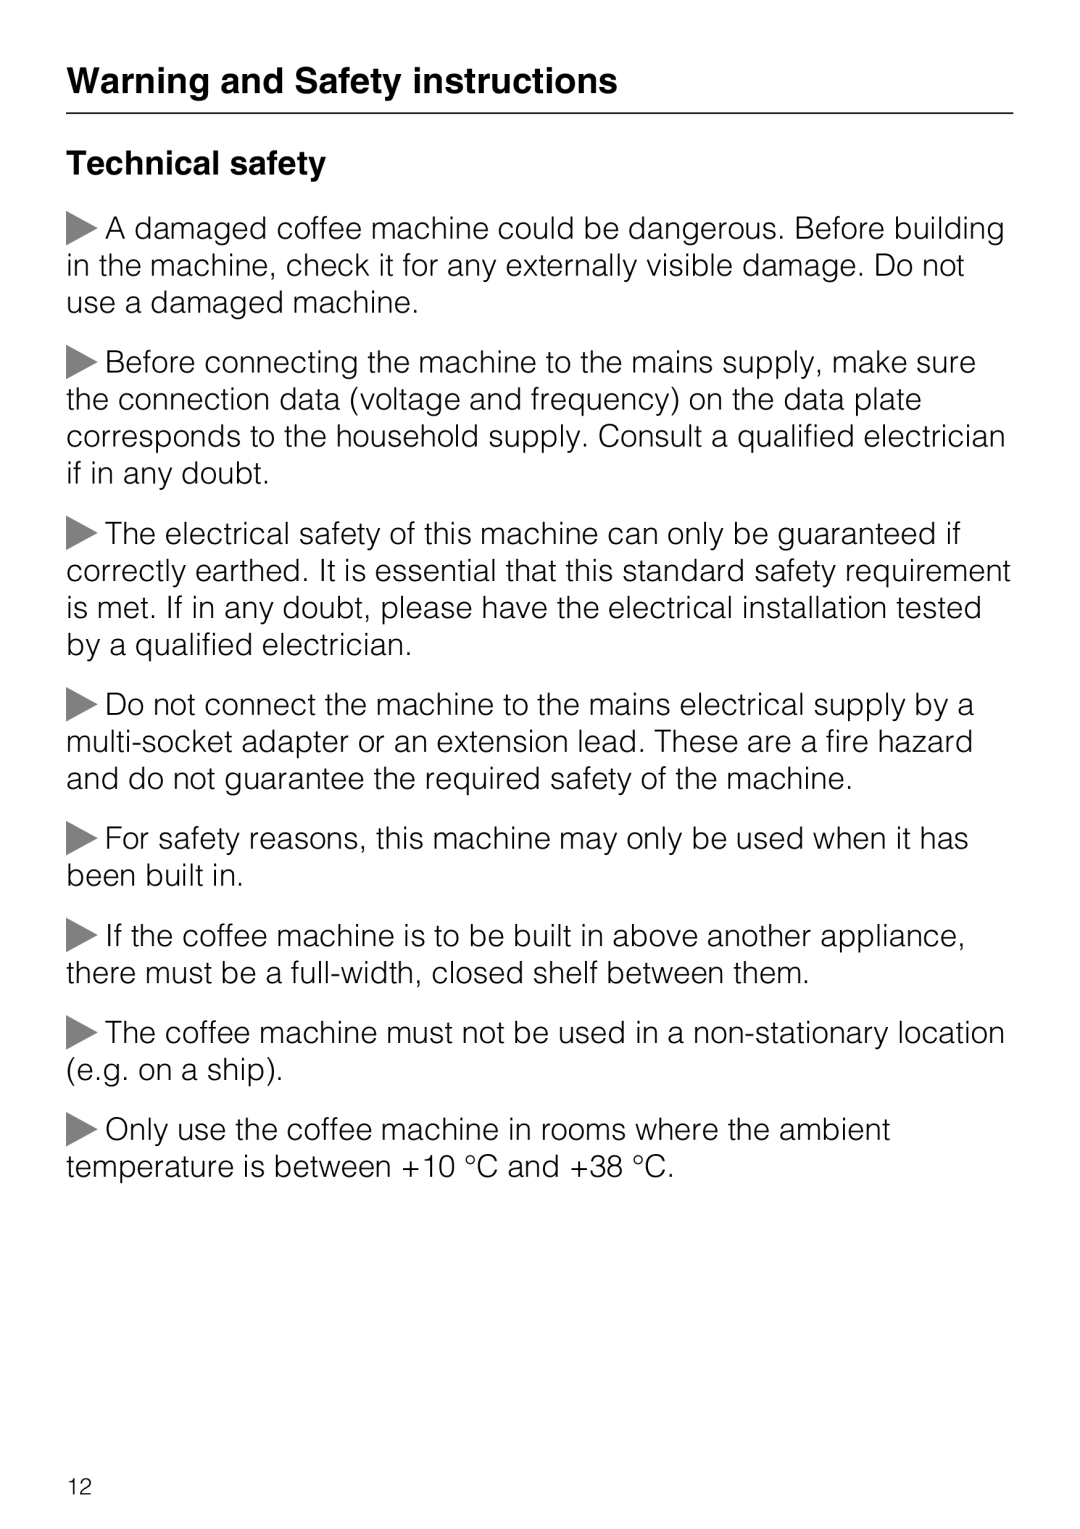 Miele CVA 6431 (C) installation instructions Technical safety, Warning and Safety instructions 